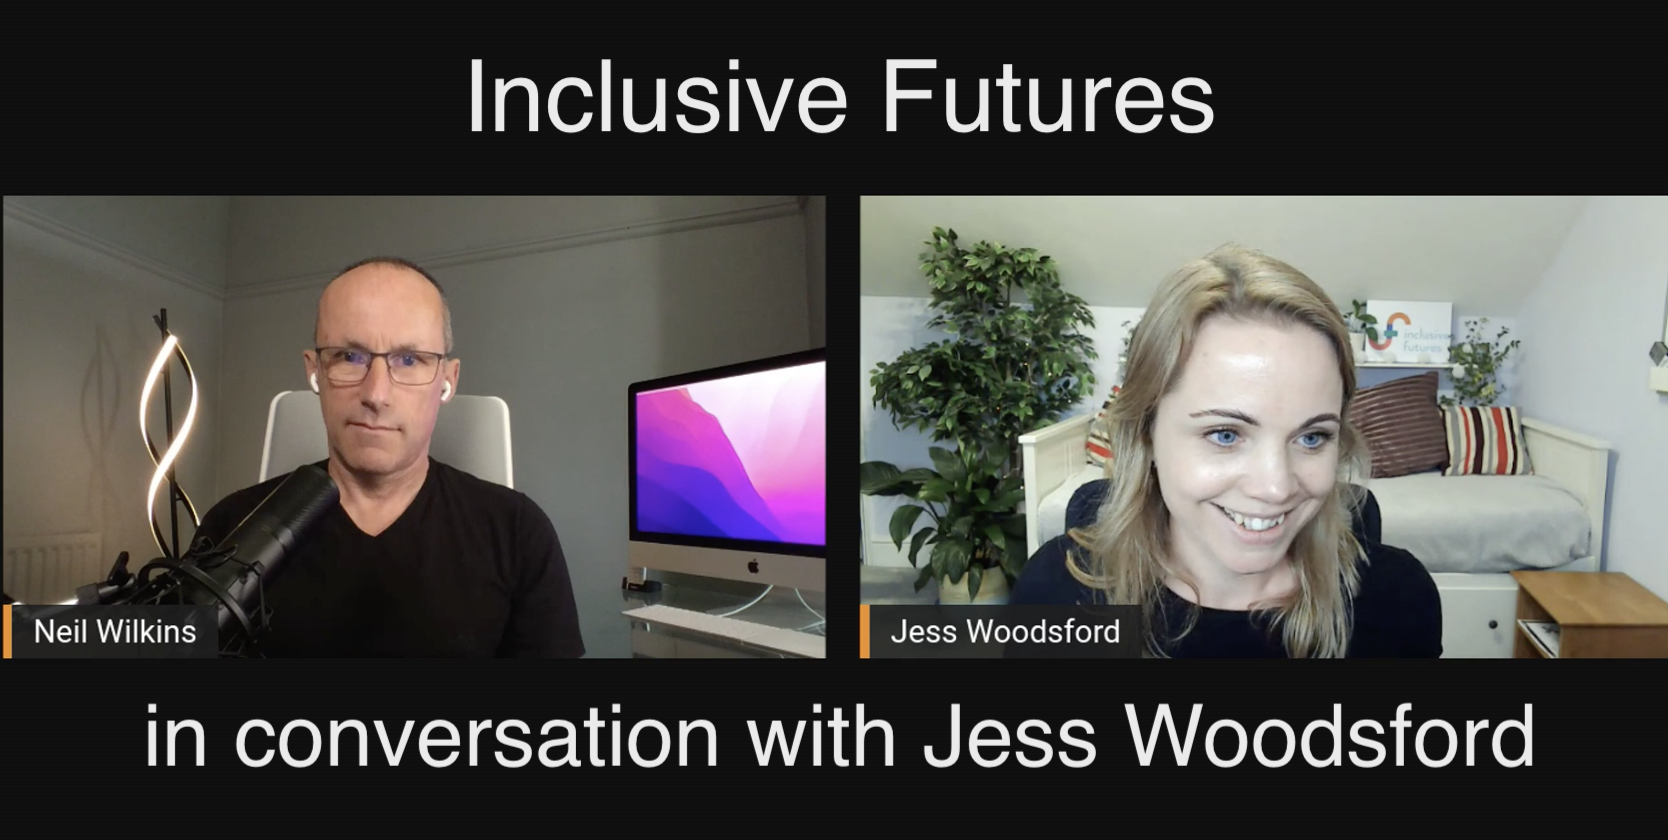 Inclusive Futures in conversation with Jess Woodsford